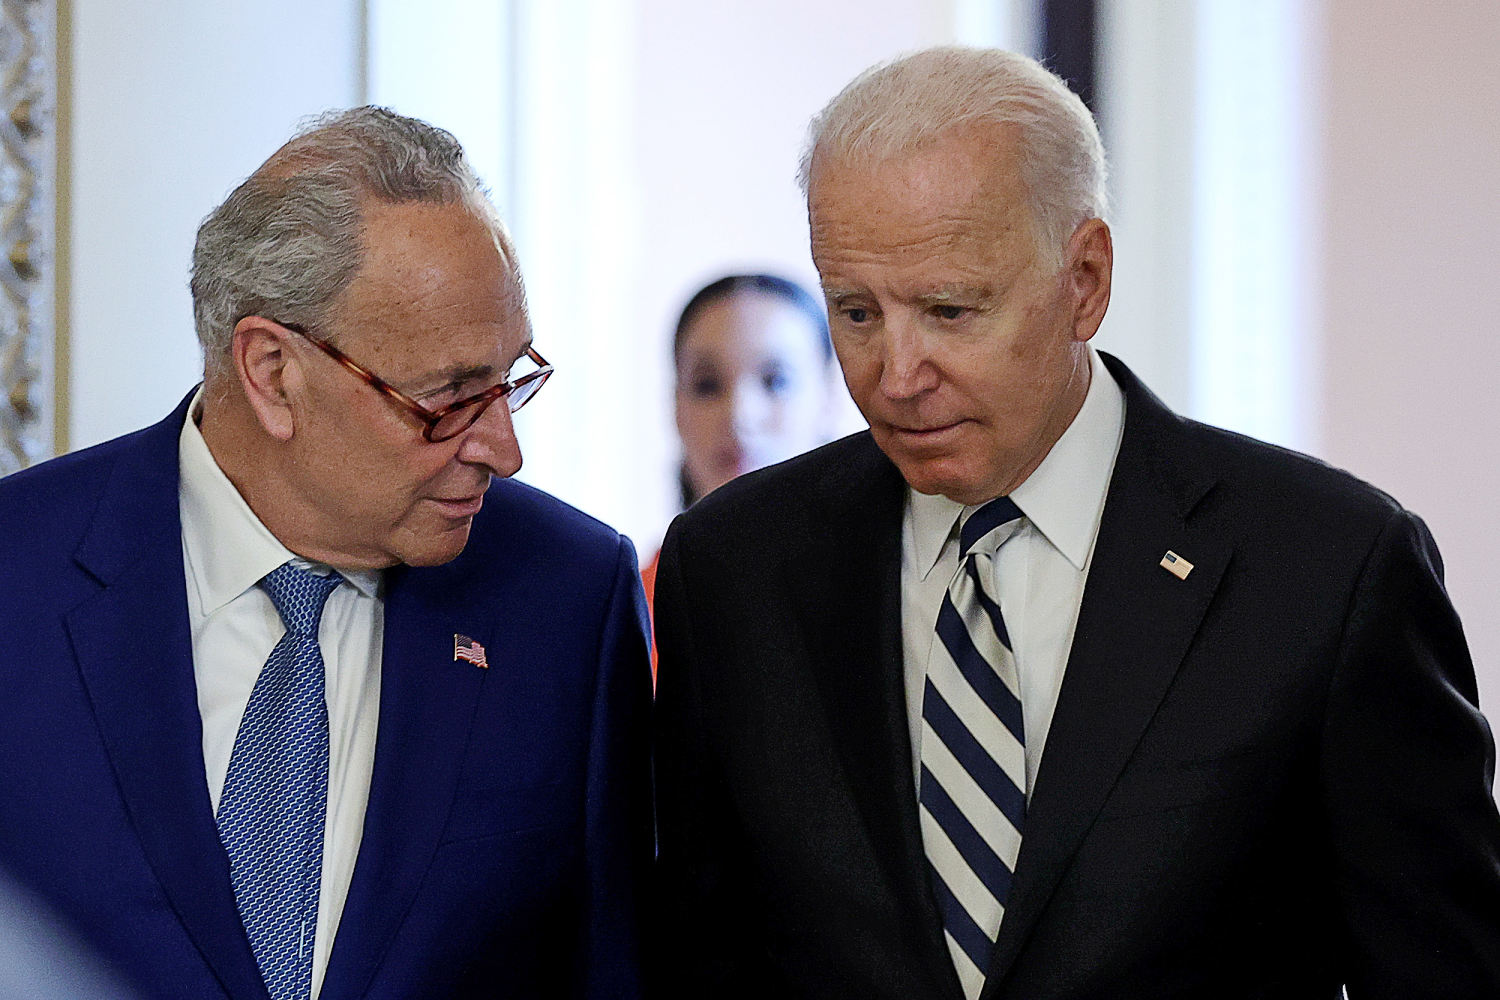 Schumer had a 'blunt' private conversation with Biden about the state of the 2024 race